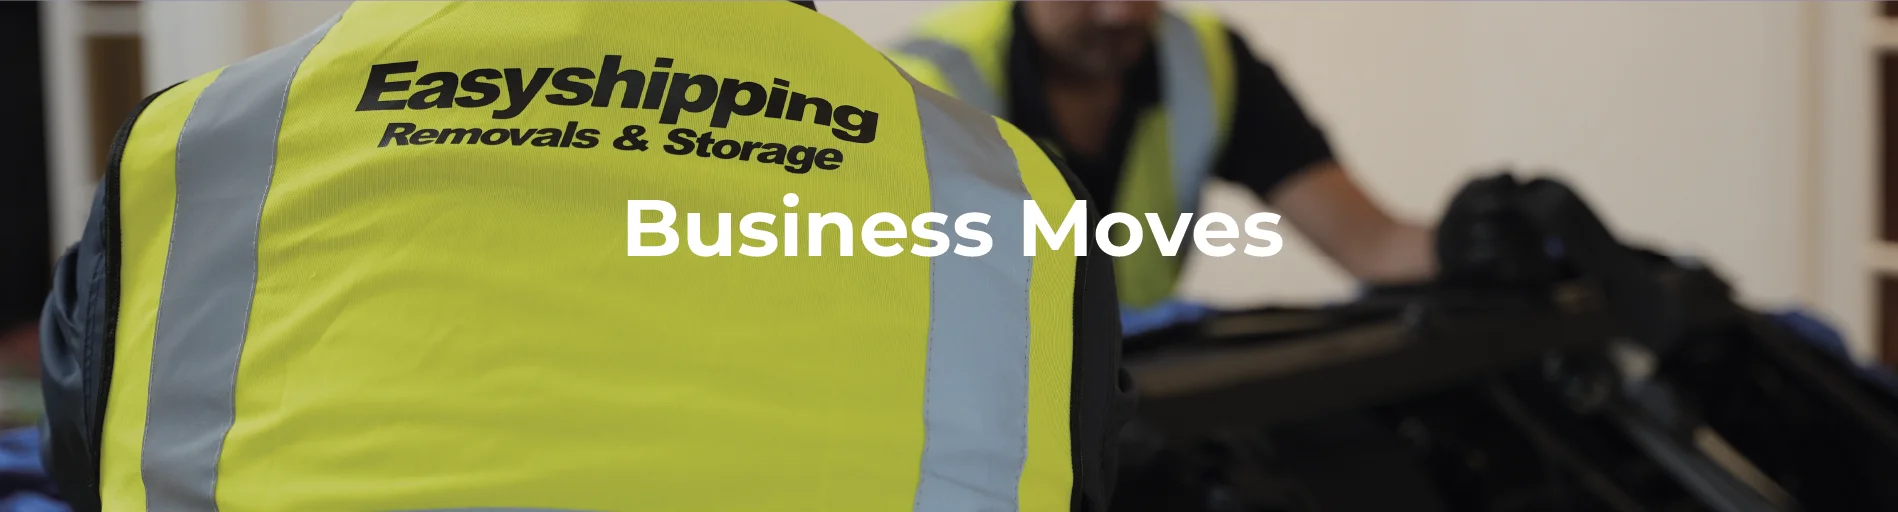 Business movers in london